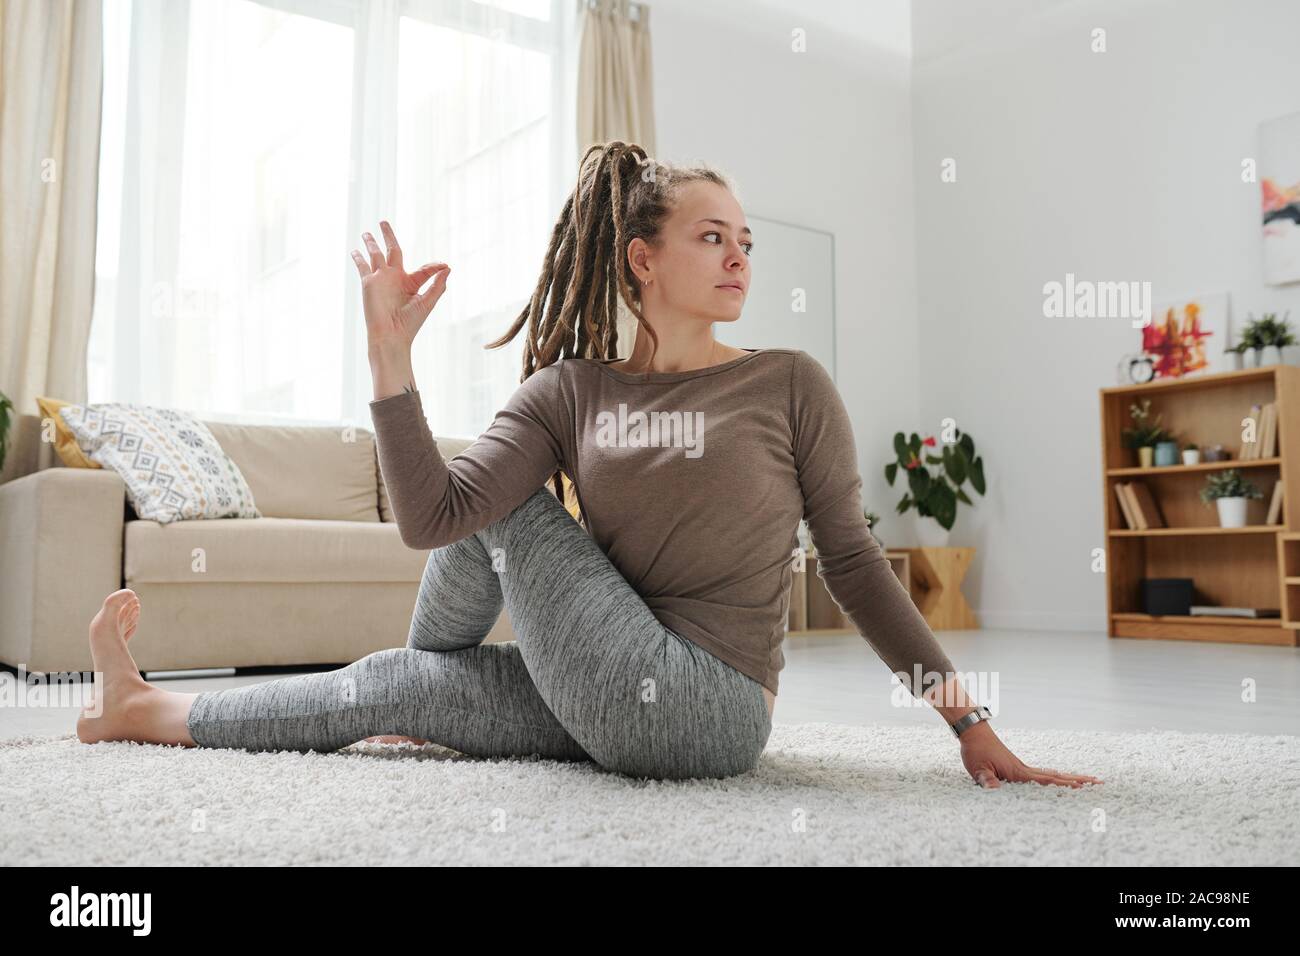 Young female with dreadlocks sitting on the floor in one of yoga positions Stock Photo